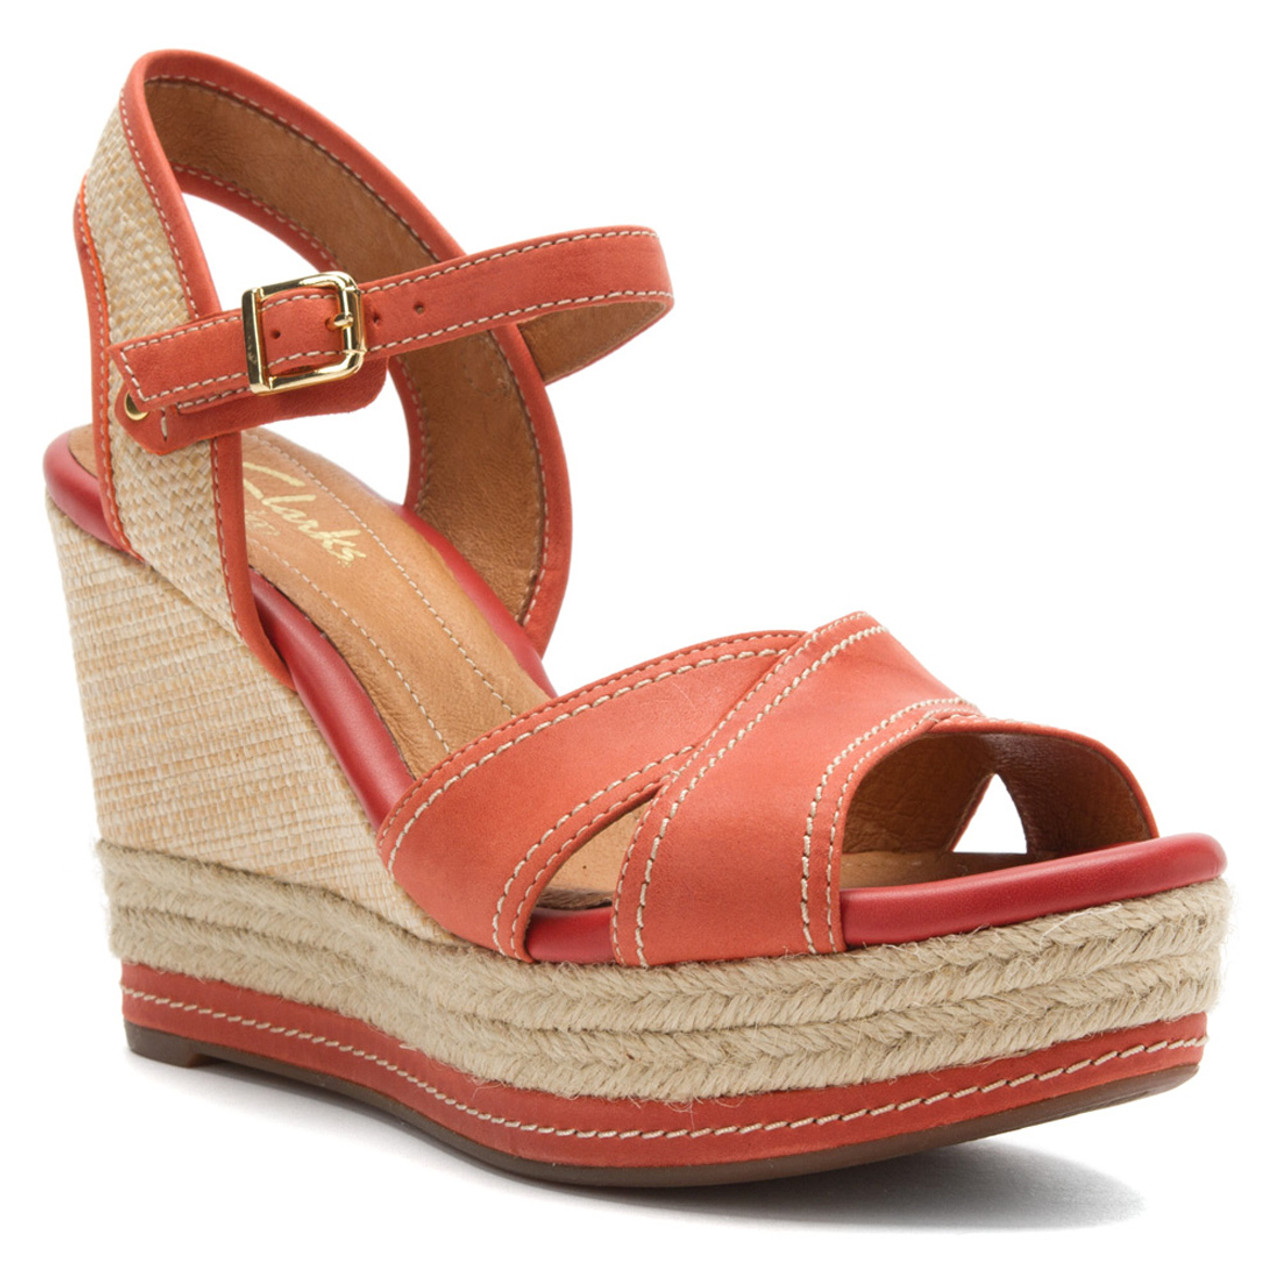 By Clarks Women's Amelia Air Sandals - Red Leather | Discount Indigo Ladies Sandals & More - Shoolu.com |